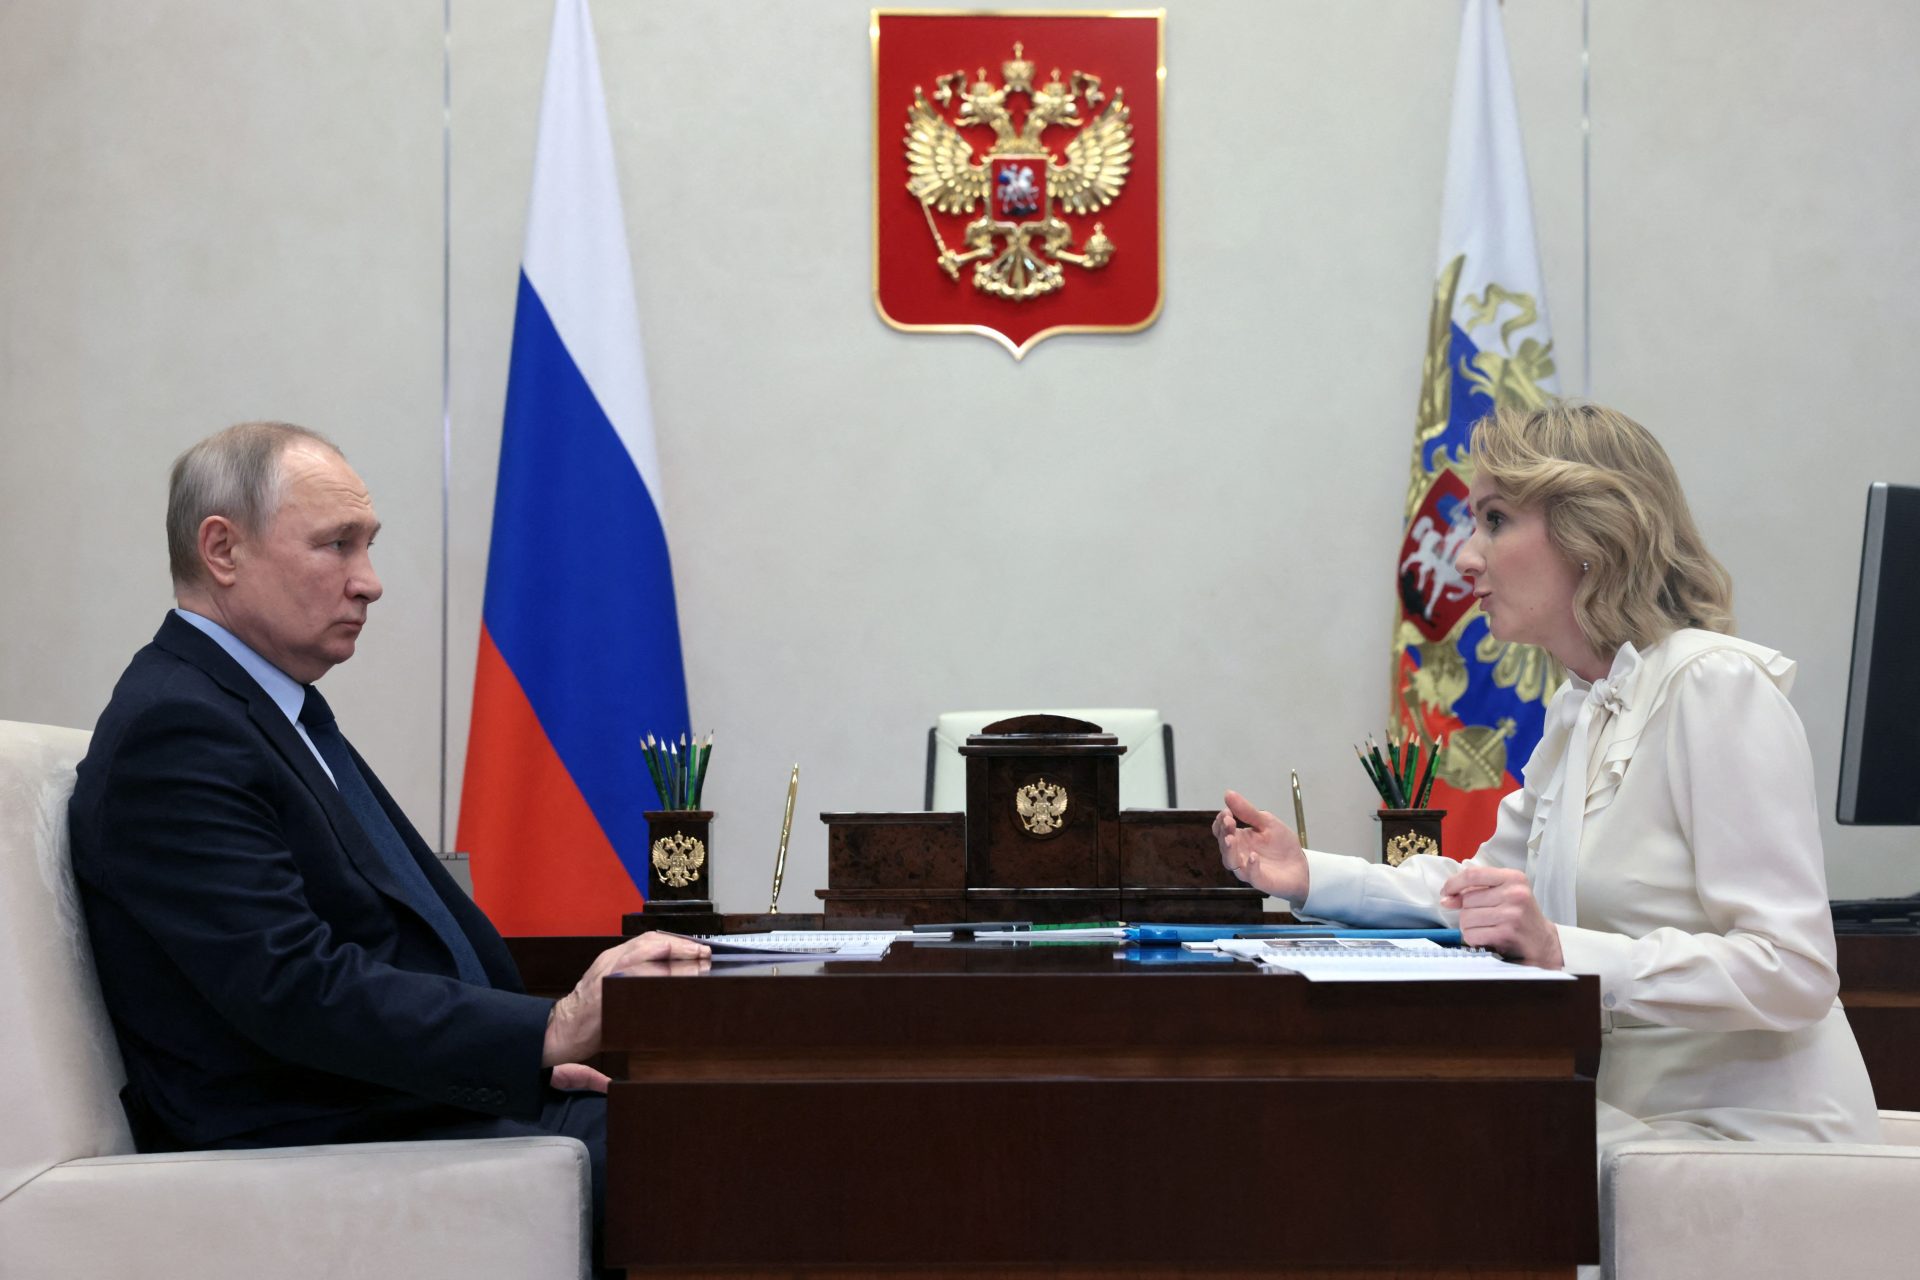 Russia says the parents agreed to have their kids taken to Russia...